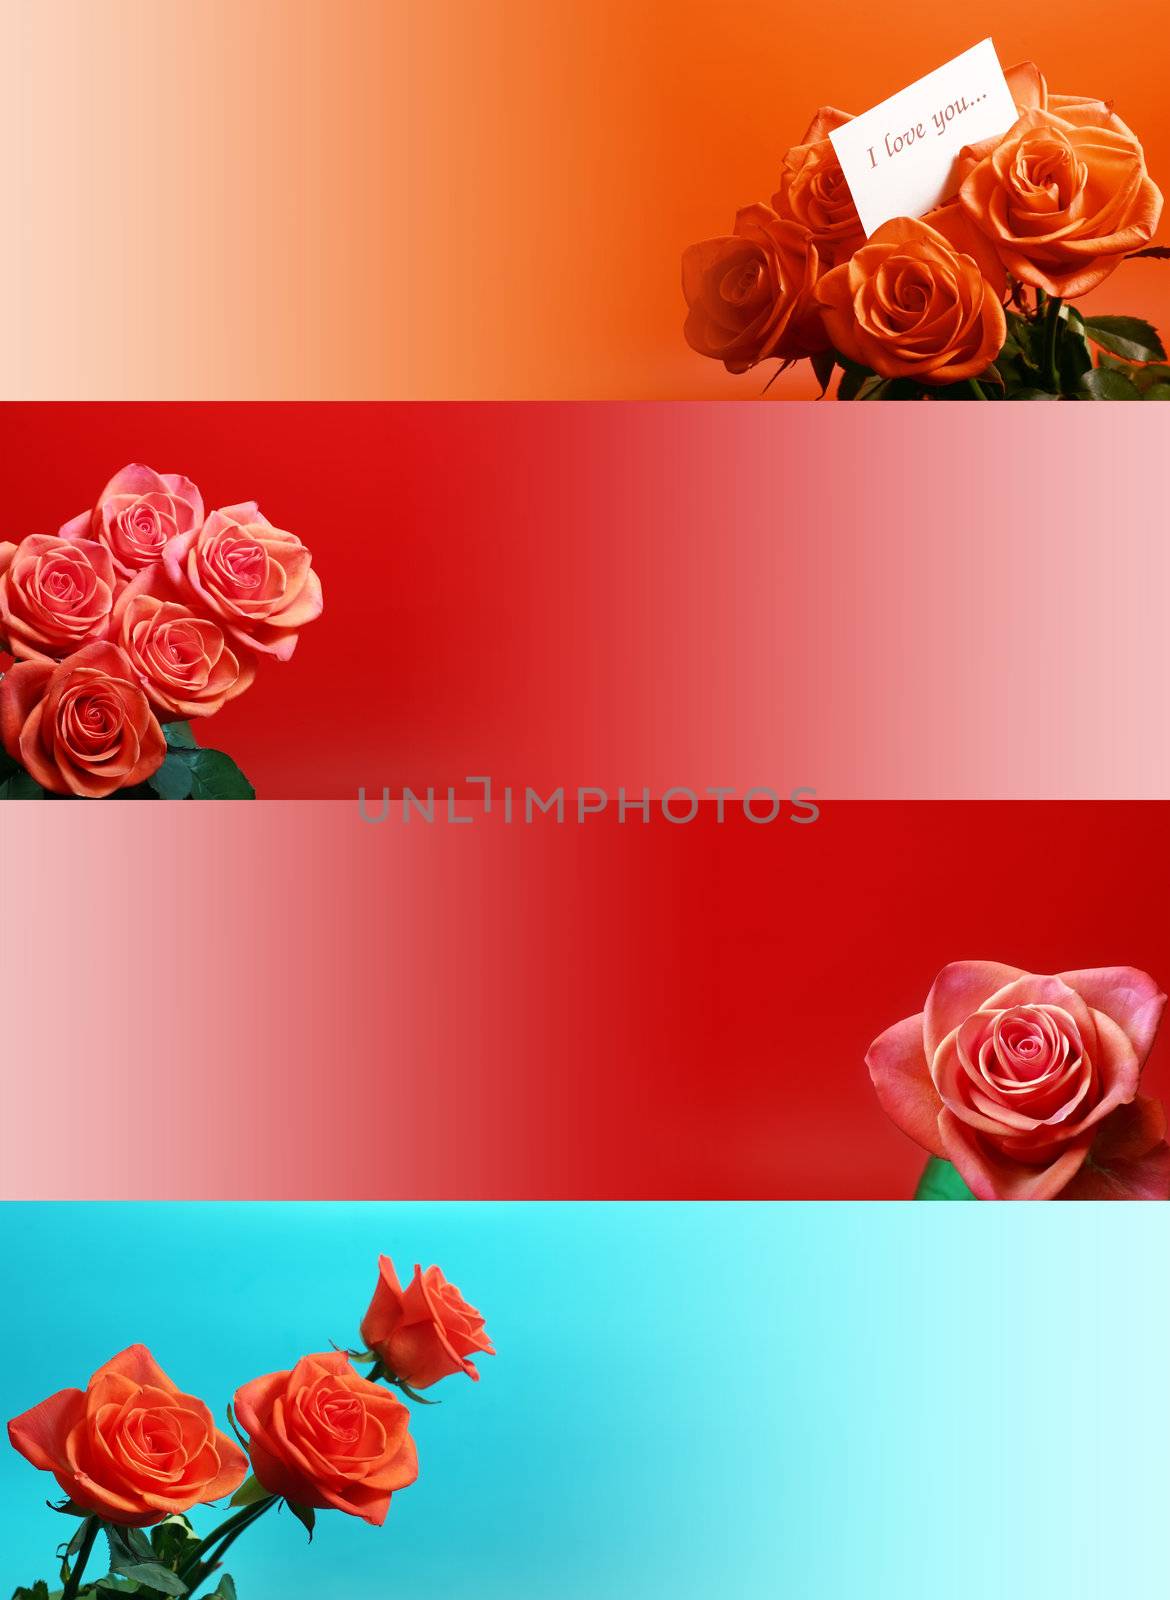 web banners with rose by rudchenko